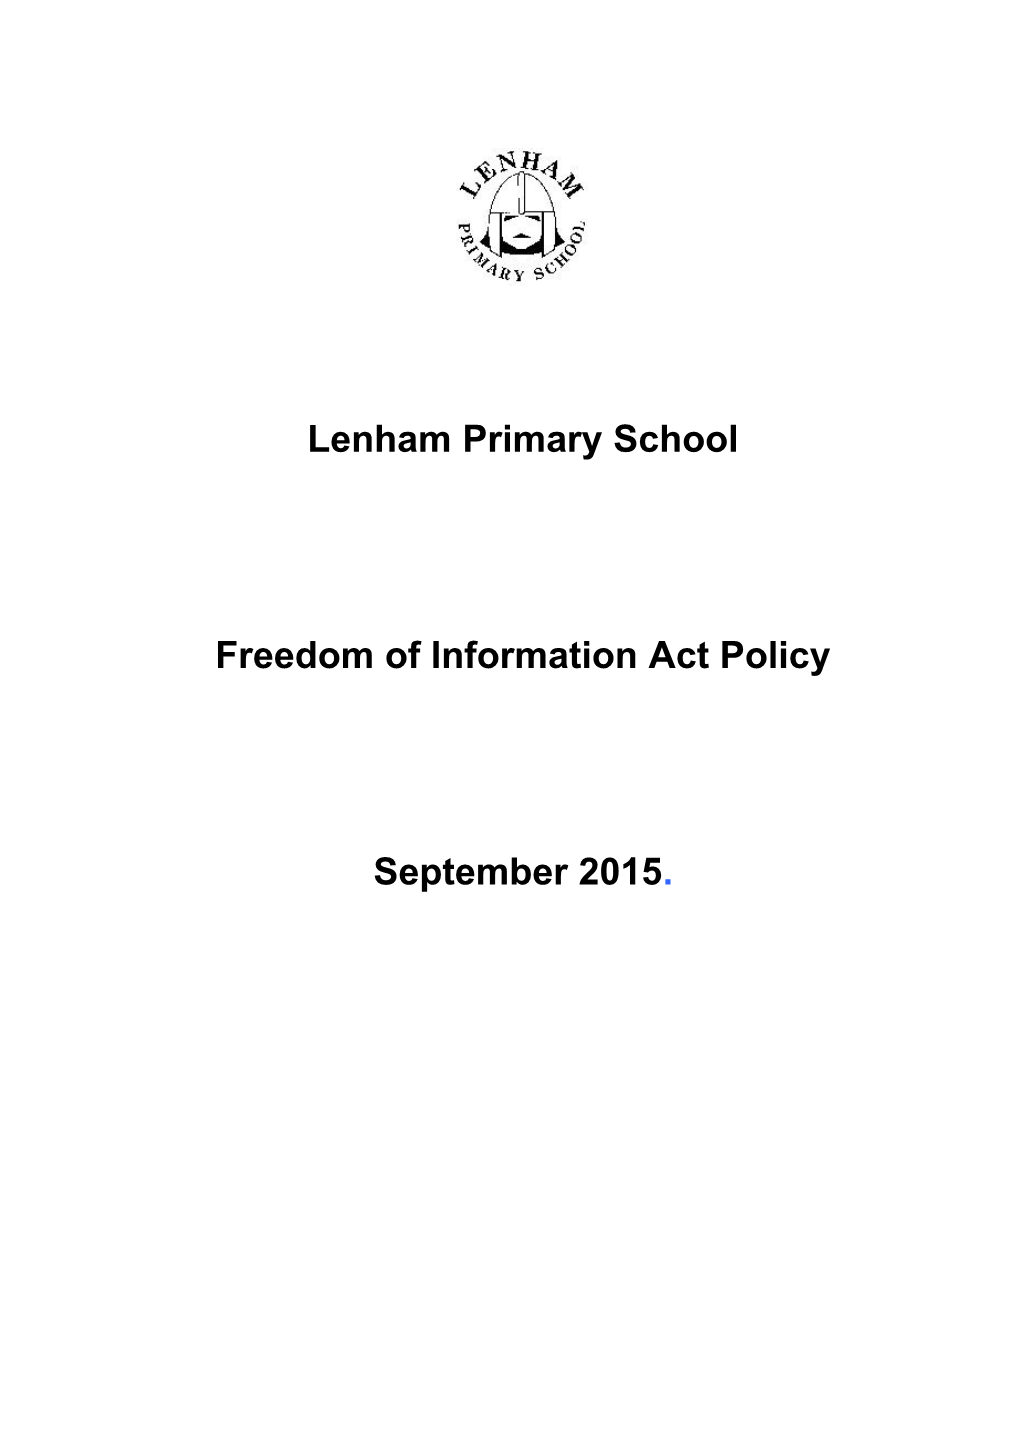 Freedom of Information Act Policy